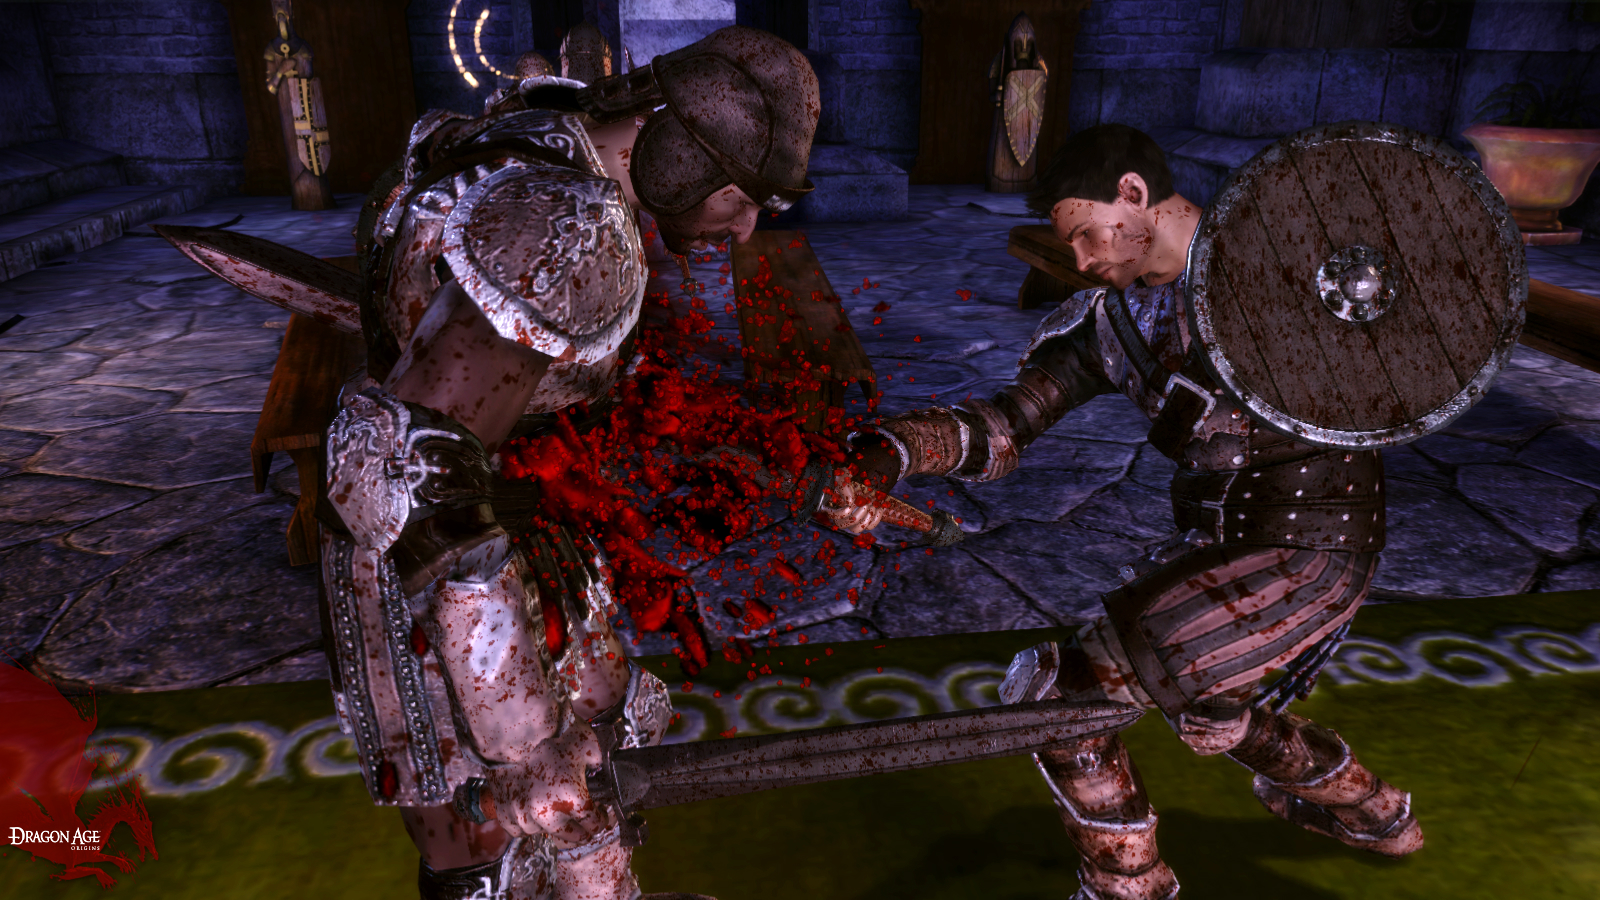 Dragon Age: Origins: the Greatest Screenshot Ever Taken and Mods, Baby  (NSFW, But In the Dumbest Possible Way) – zeb does bioware (and beyond)